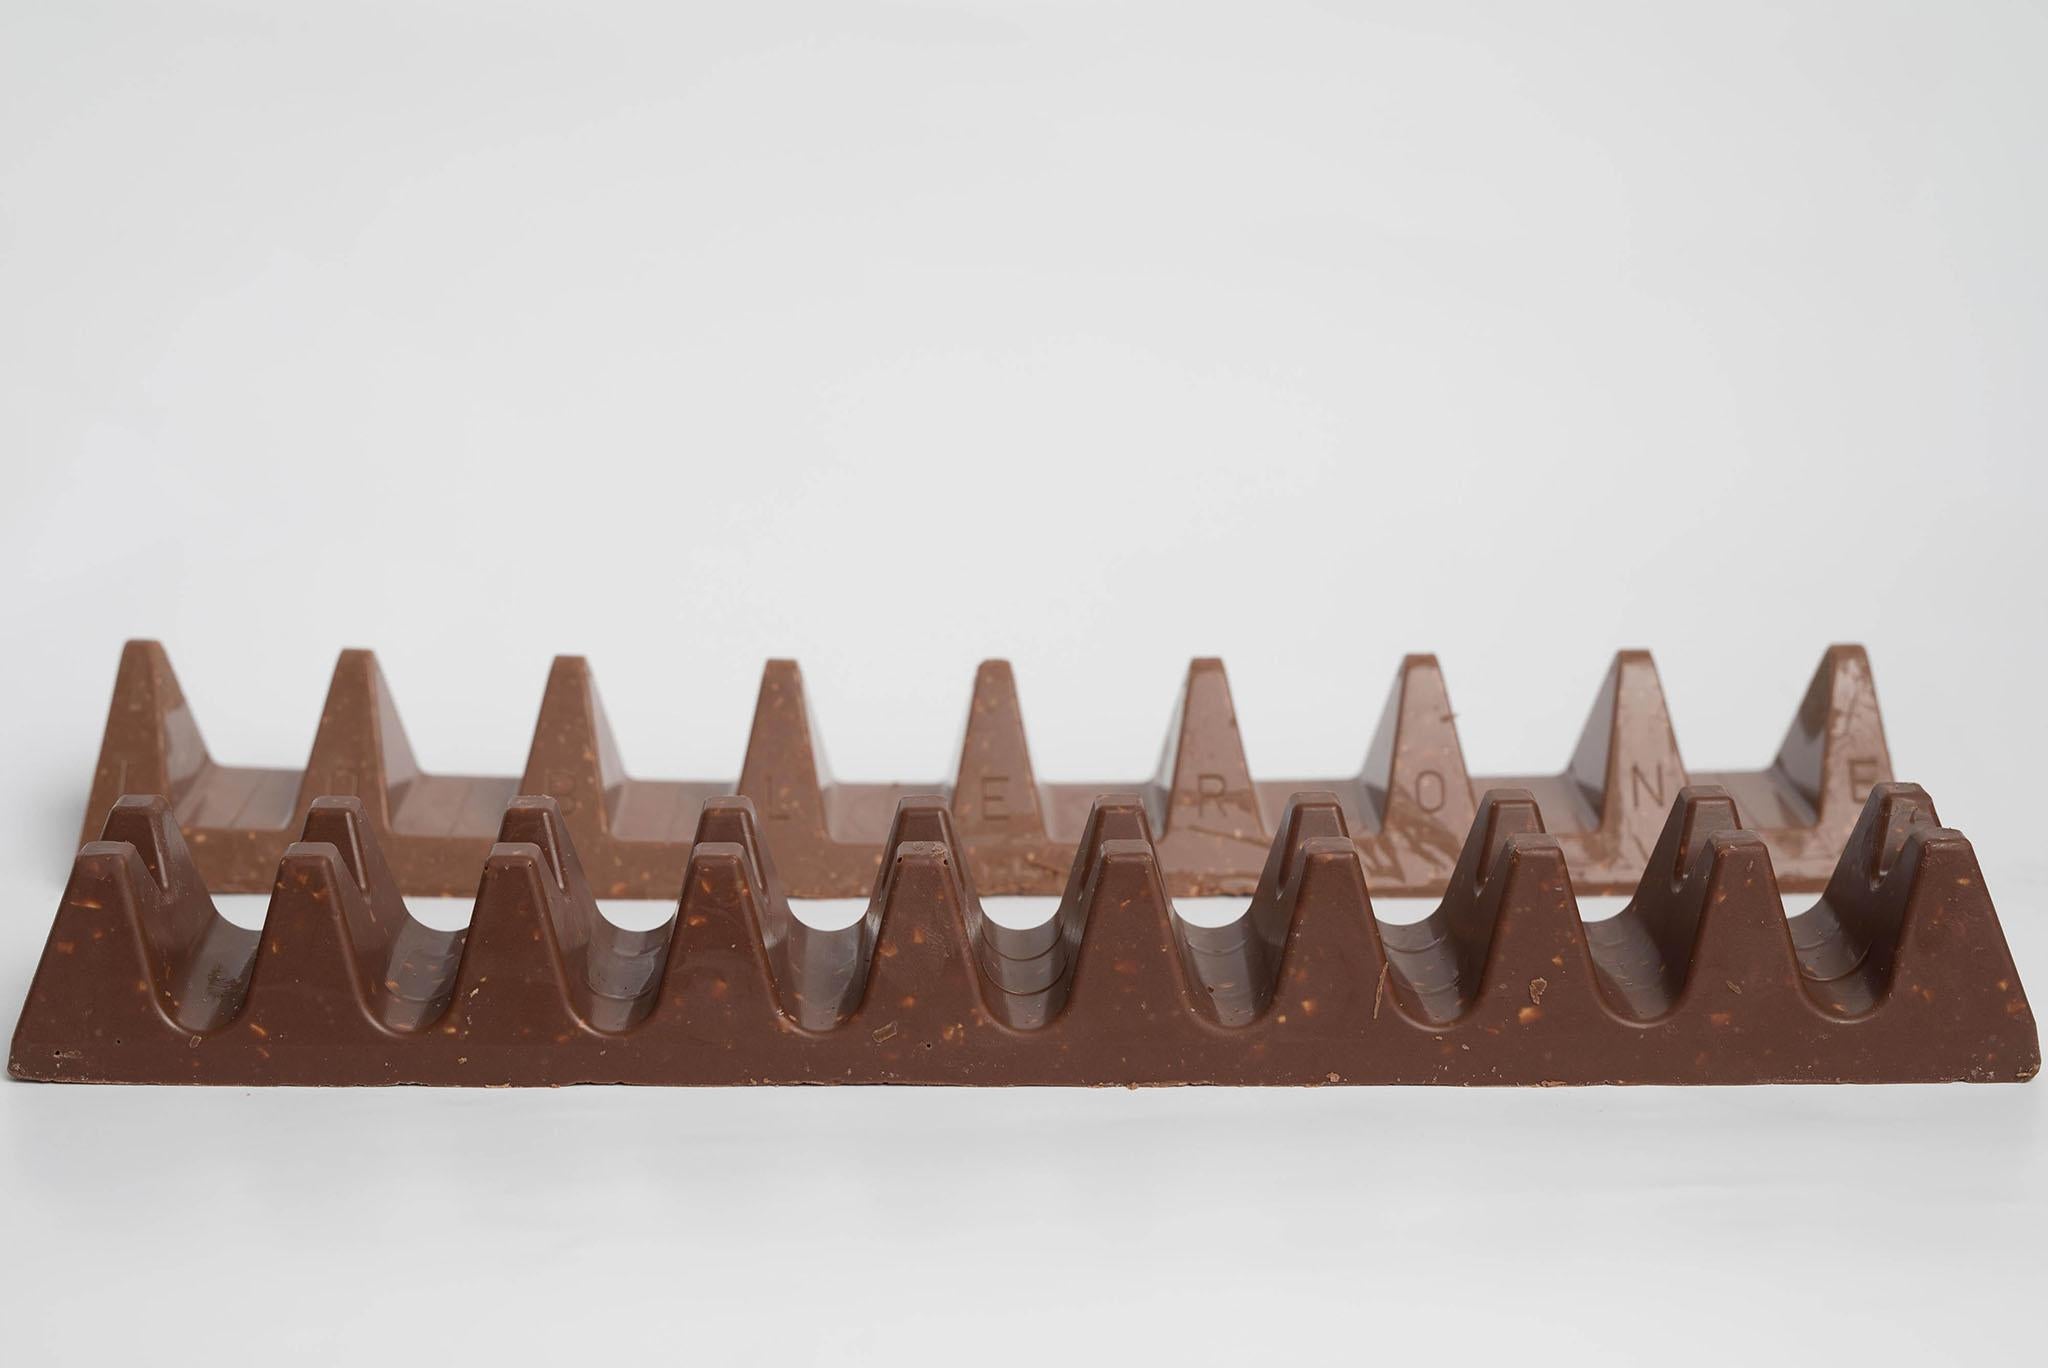 Poundland's Twin Peaks bar (front) launched on the back of Toblerone reducing the number of triangles